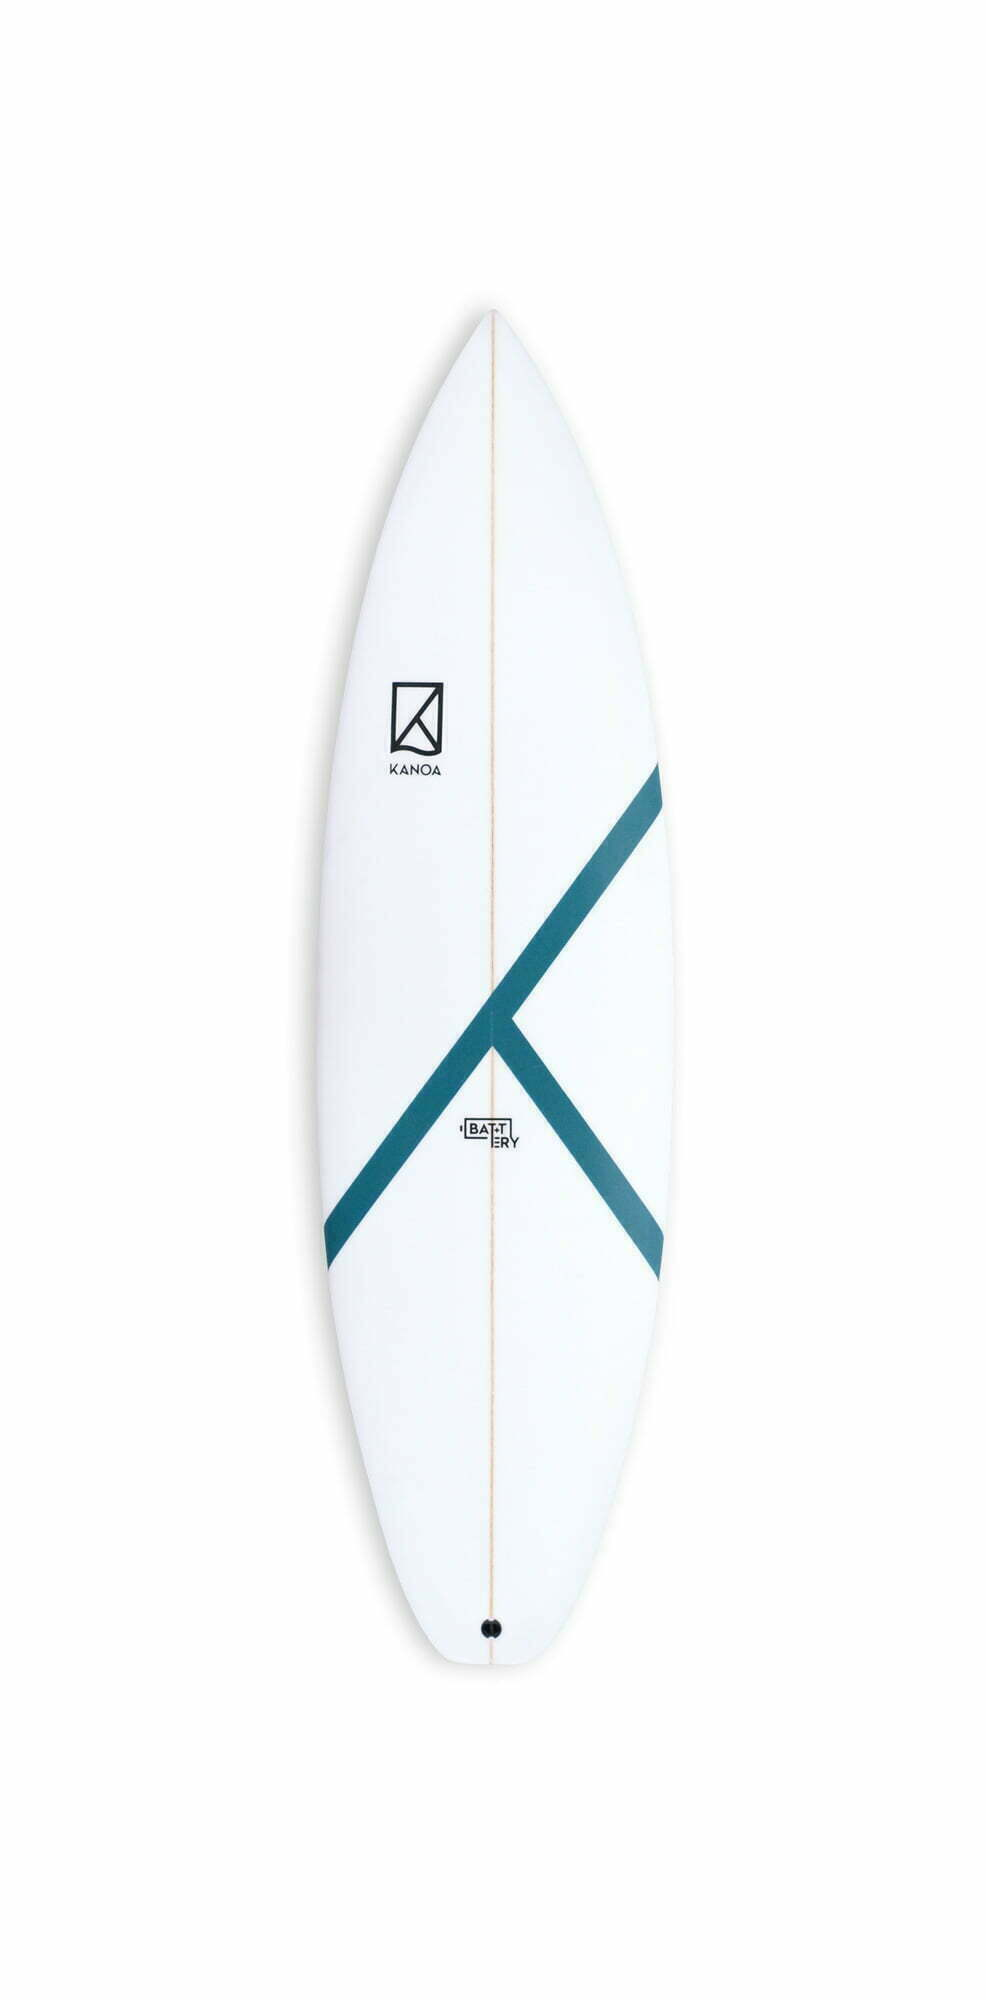 High-Performance Riverboard Surfboard for advanced surfers